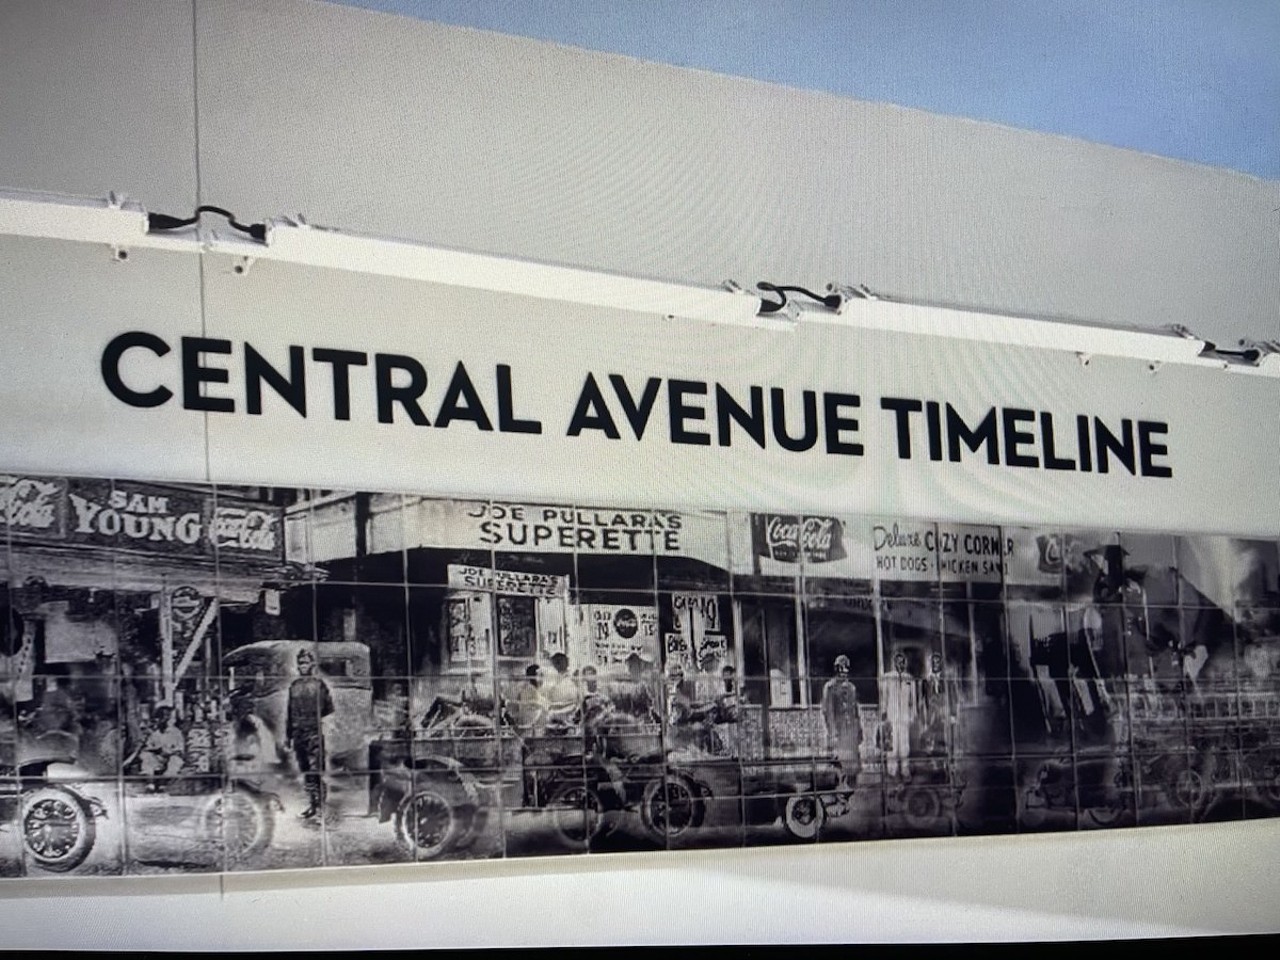 Central Ave. Timeline Mural
Downtown Tampa
Located within downtown Tampa’s Perry Harvey St. Park in the moments before Alexis is let go, Sharelle says the history motivates her to keep elevating Black business people in Tampa Bay. The timeline should remind the rest of us how Tampa's Black business corridor was decimated by white supremacy cloaked under the auspice of progress (and interstates)